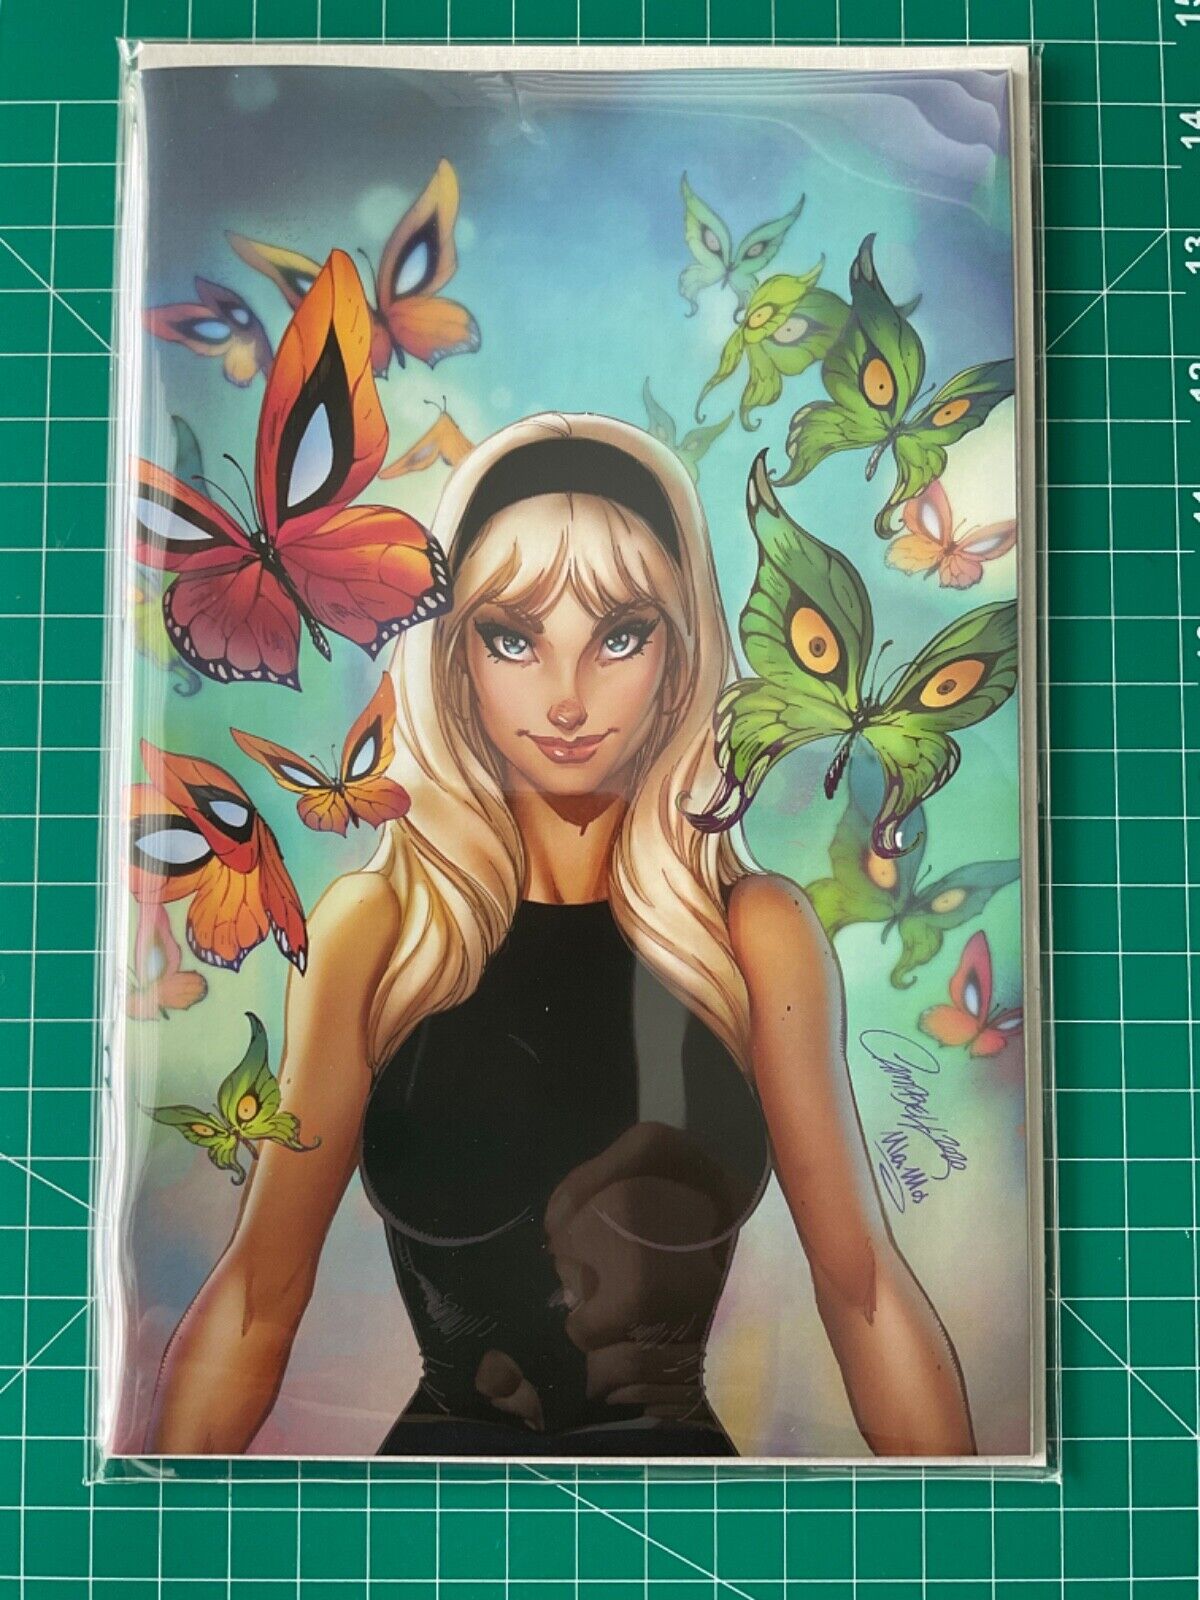 Gwen Stacy #1 (2019) J. Scott Campbell Virgin Variant Limited to 3000 NM